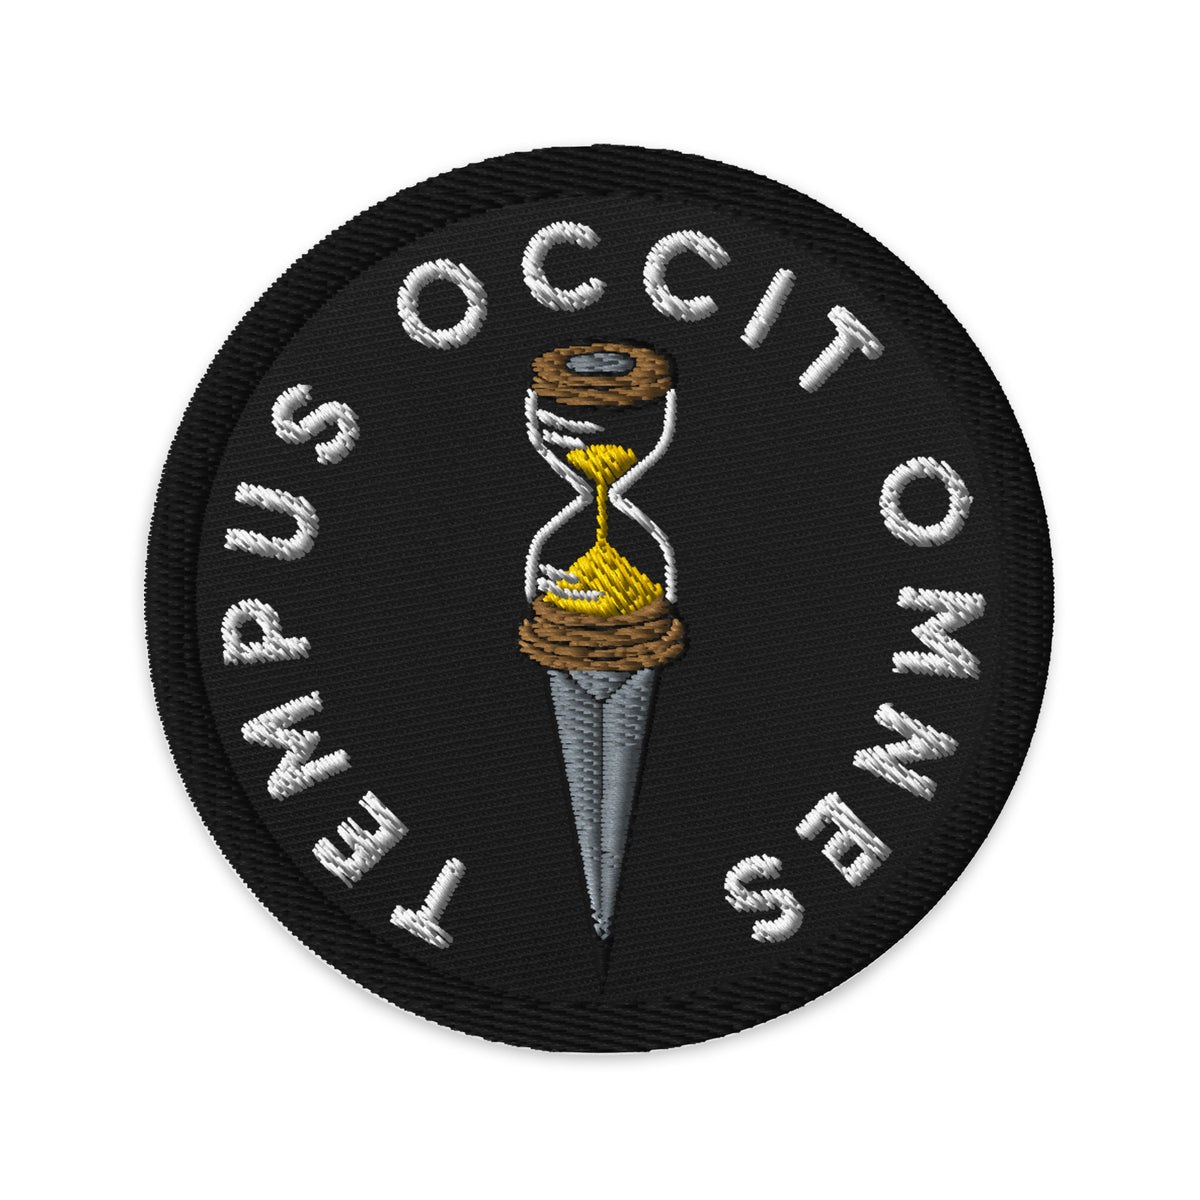 Tempus Occit Omnes Time Kills All Embroidered Patch